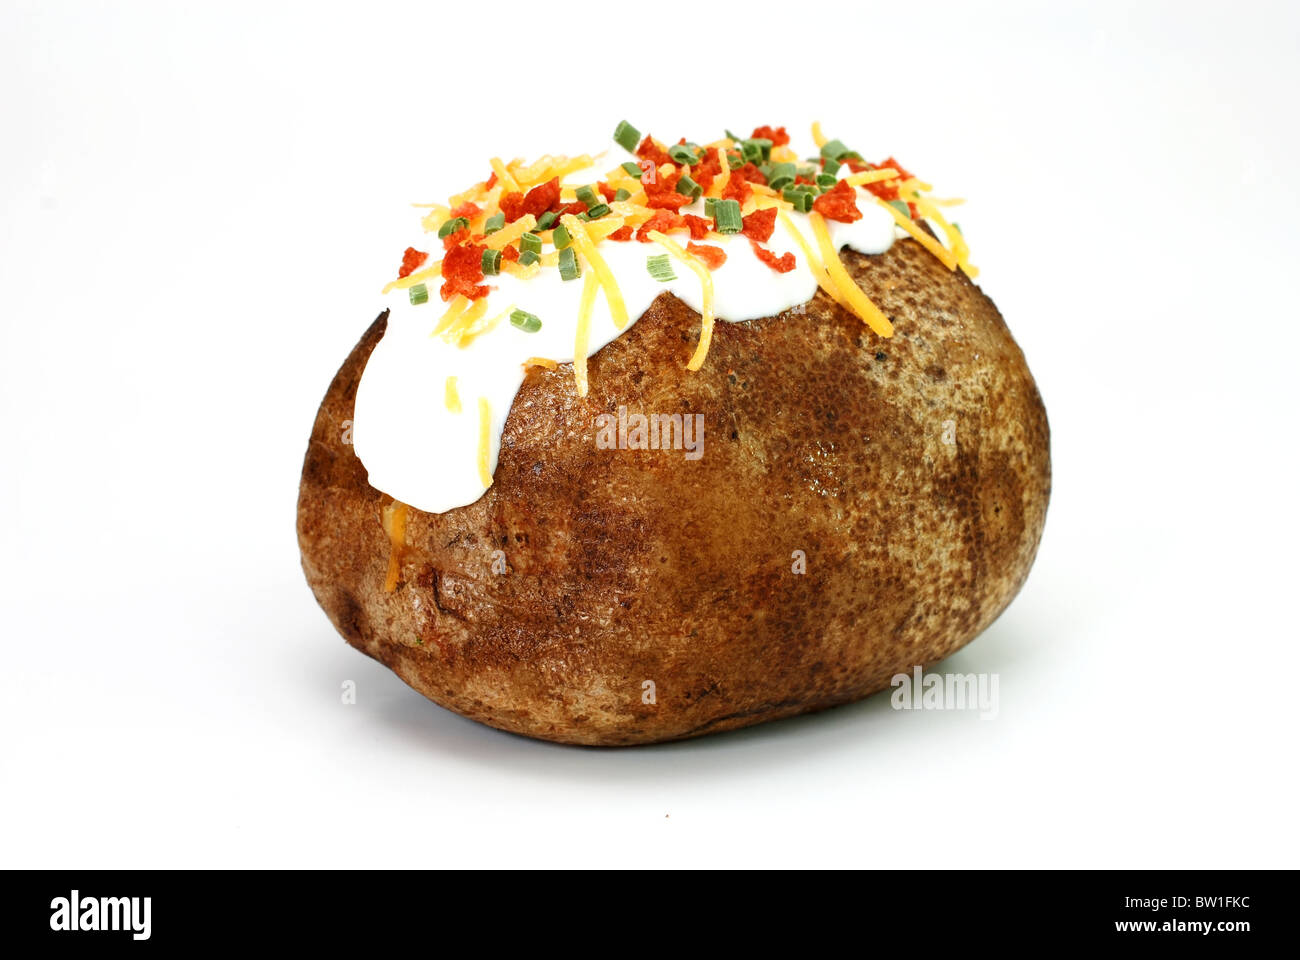 Baked potato loaded with butter, sour cream, cheddar cheese, bacon bits, and chives. Isolated on white background. Stock Photo